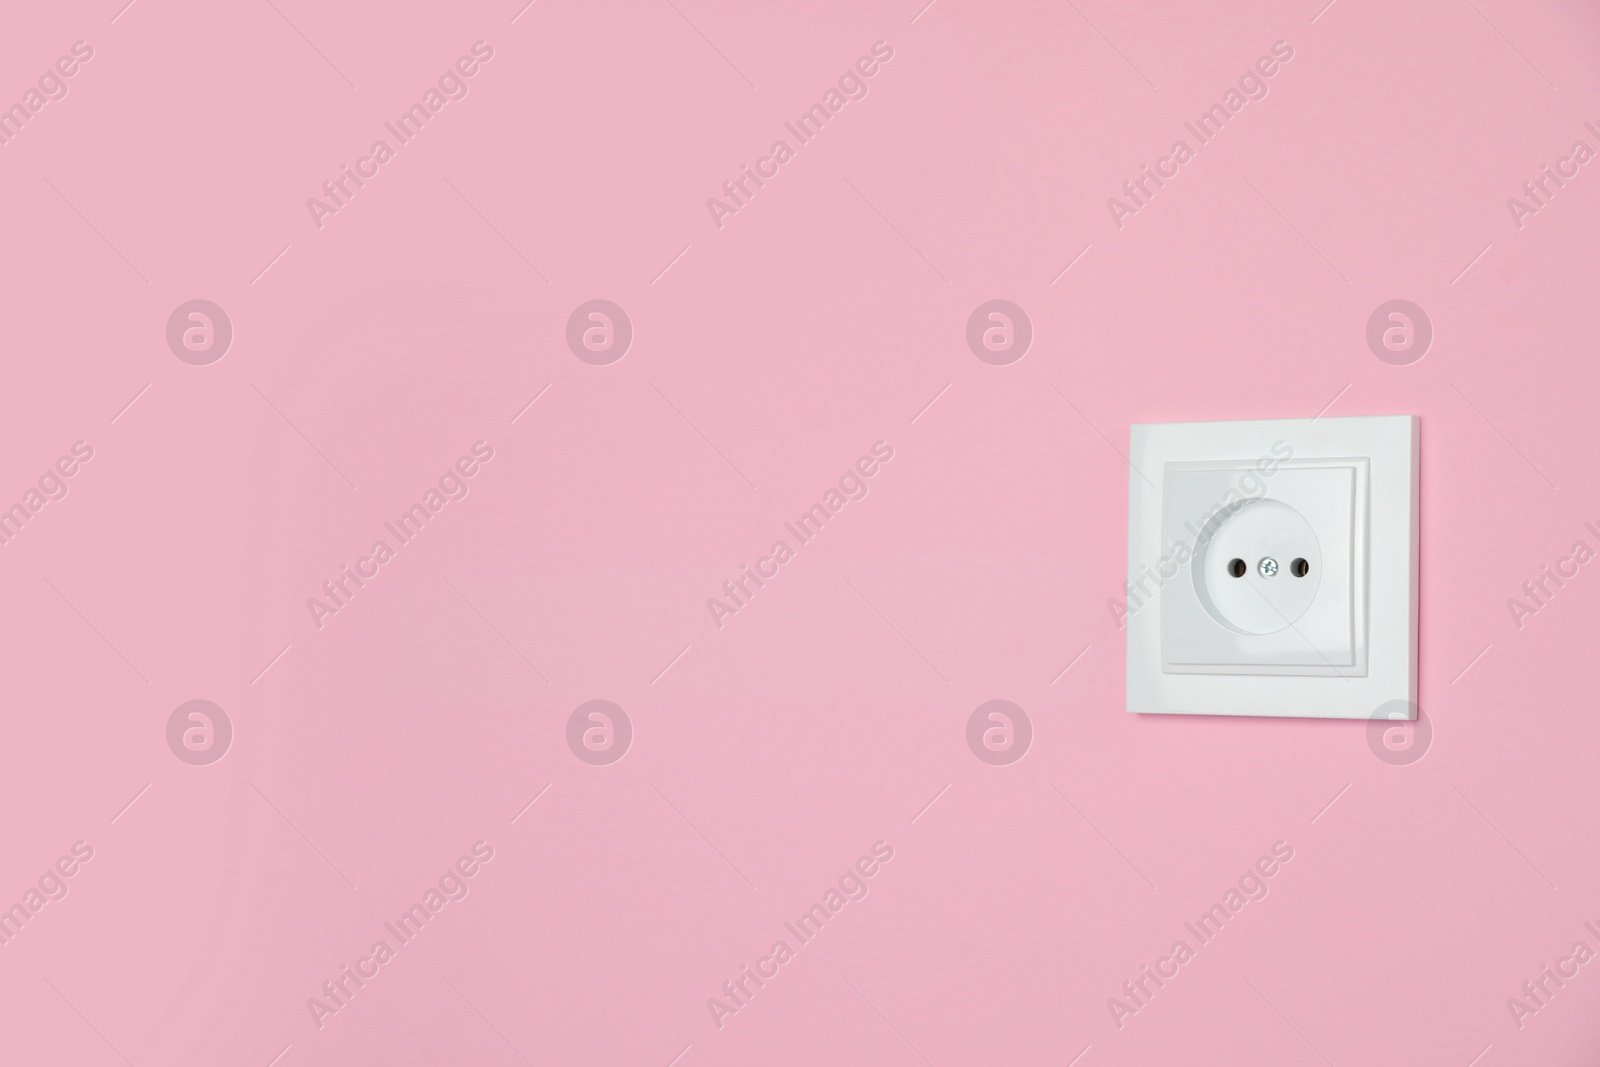 Photo of Power socket on pink wall, space for text. Electrical supply